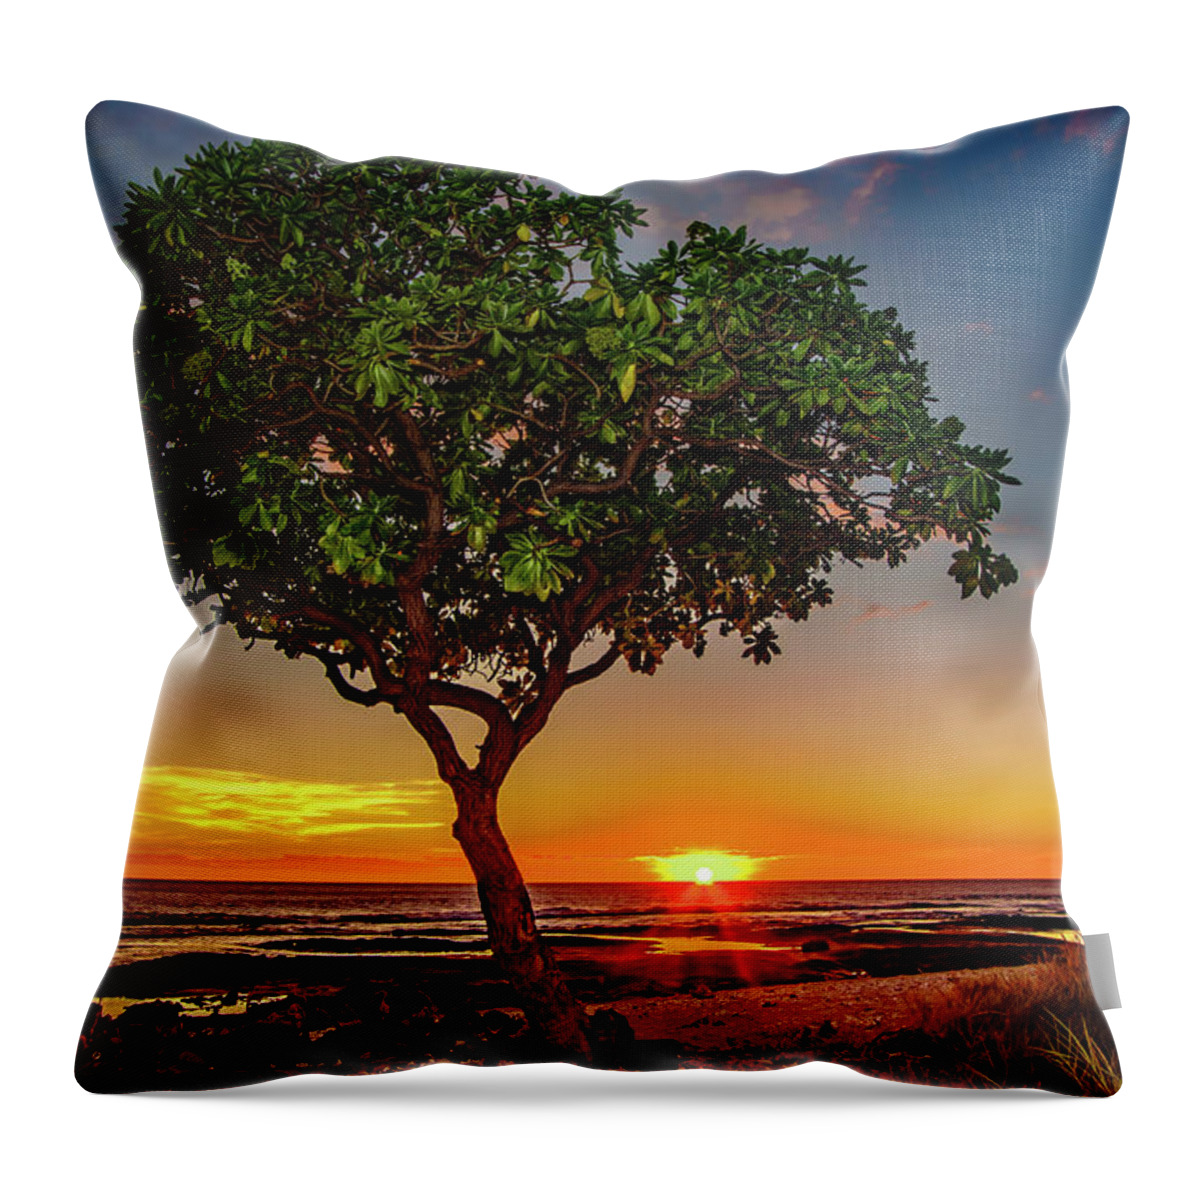 Hawaii Throw Pillow featuring the photograph Sunset Tree by John Bauer